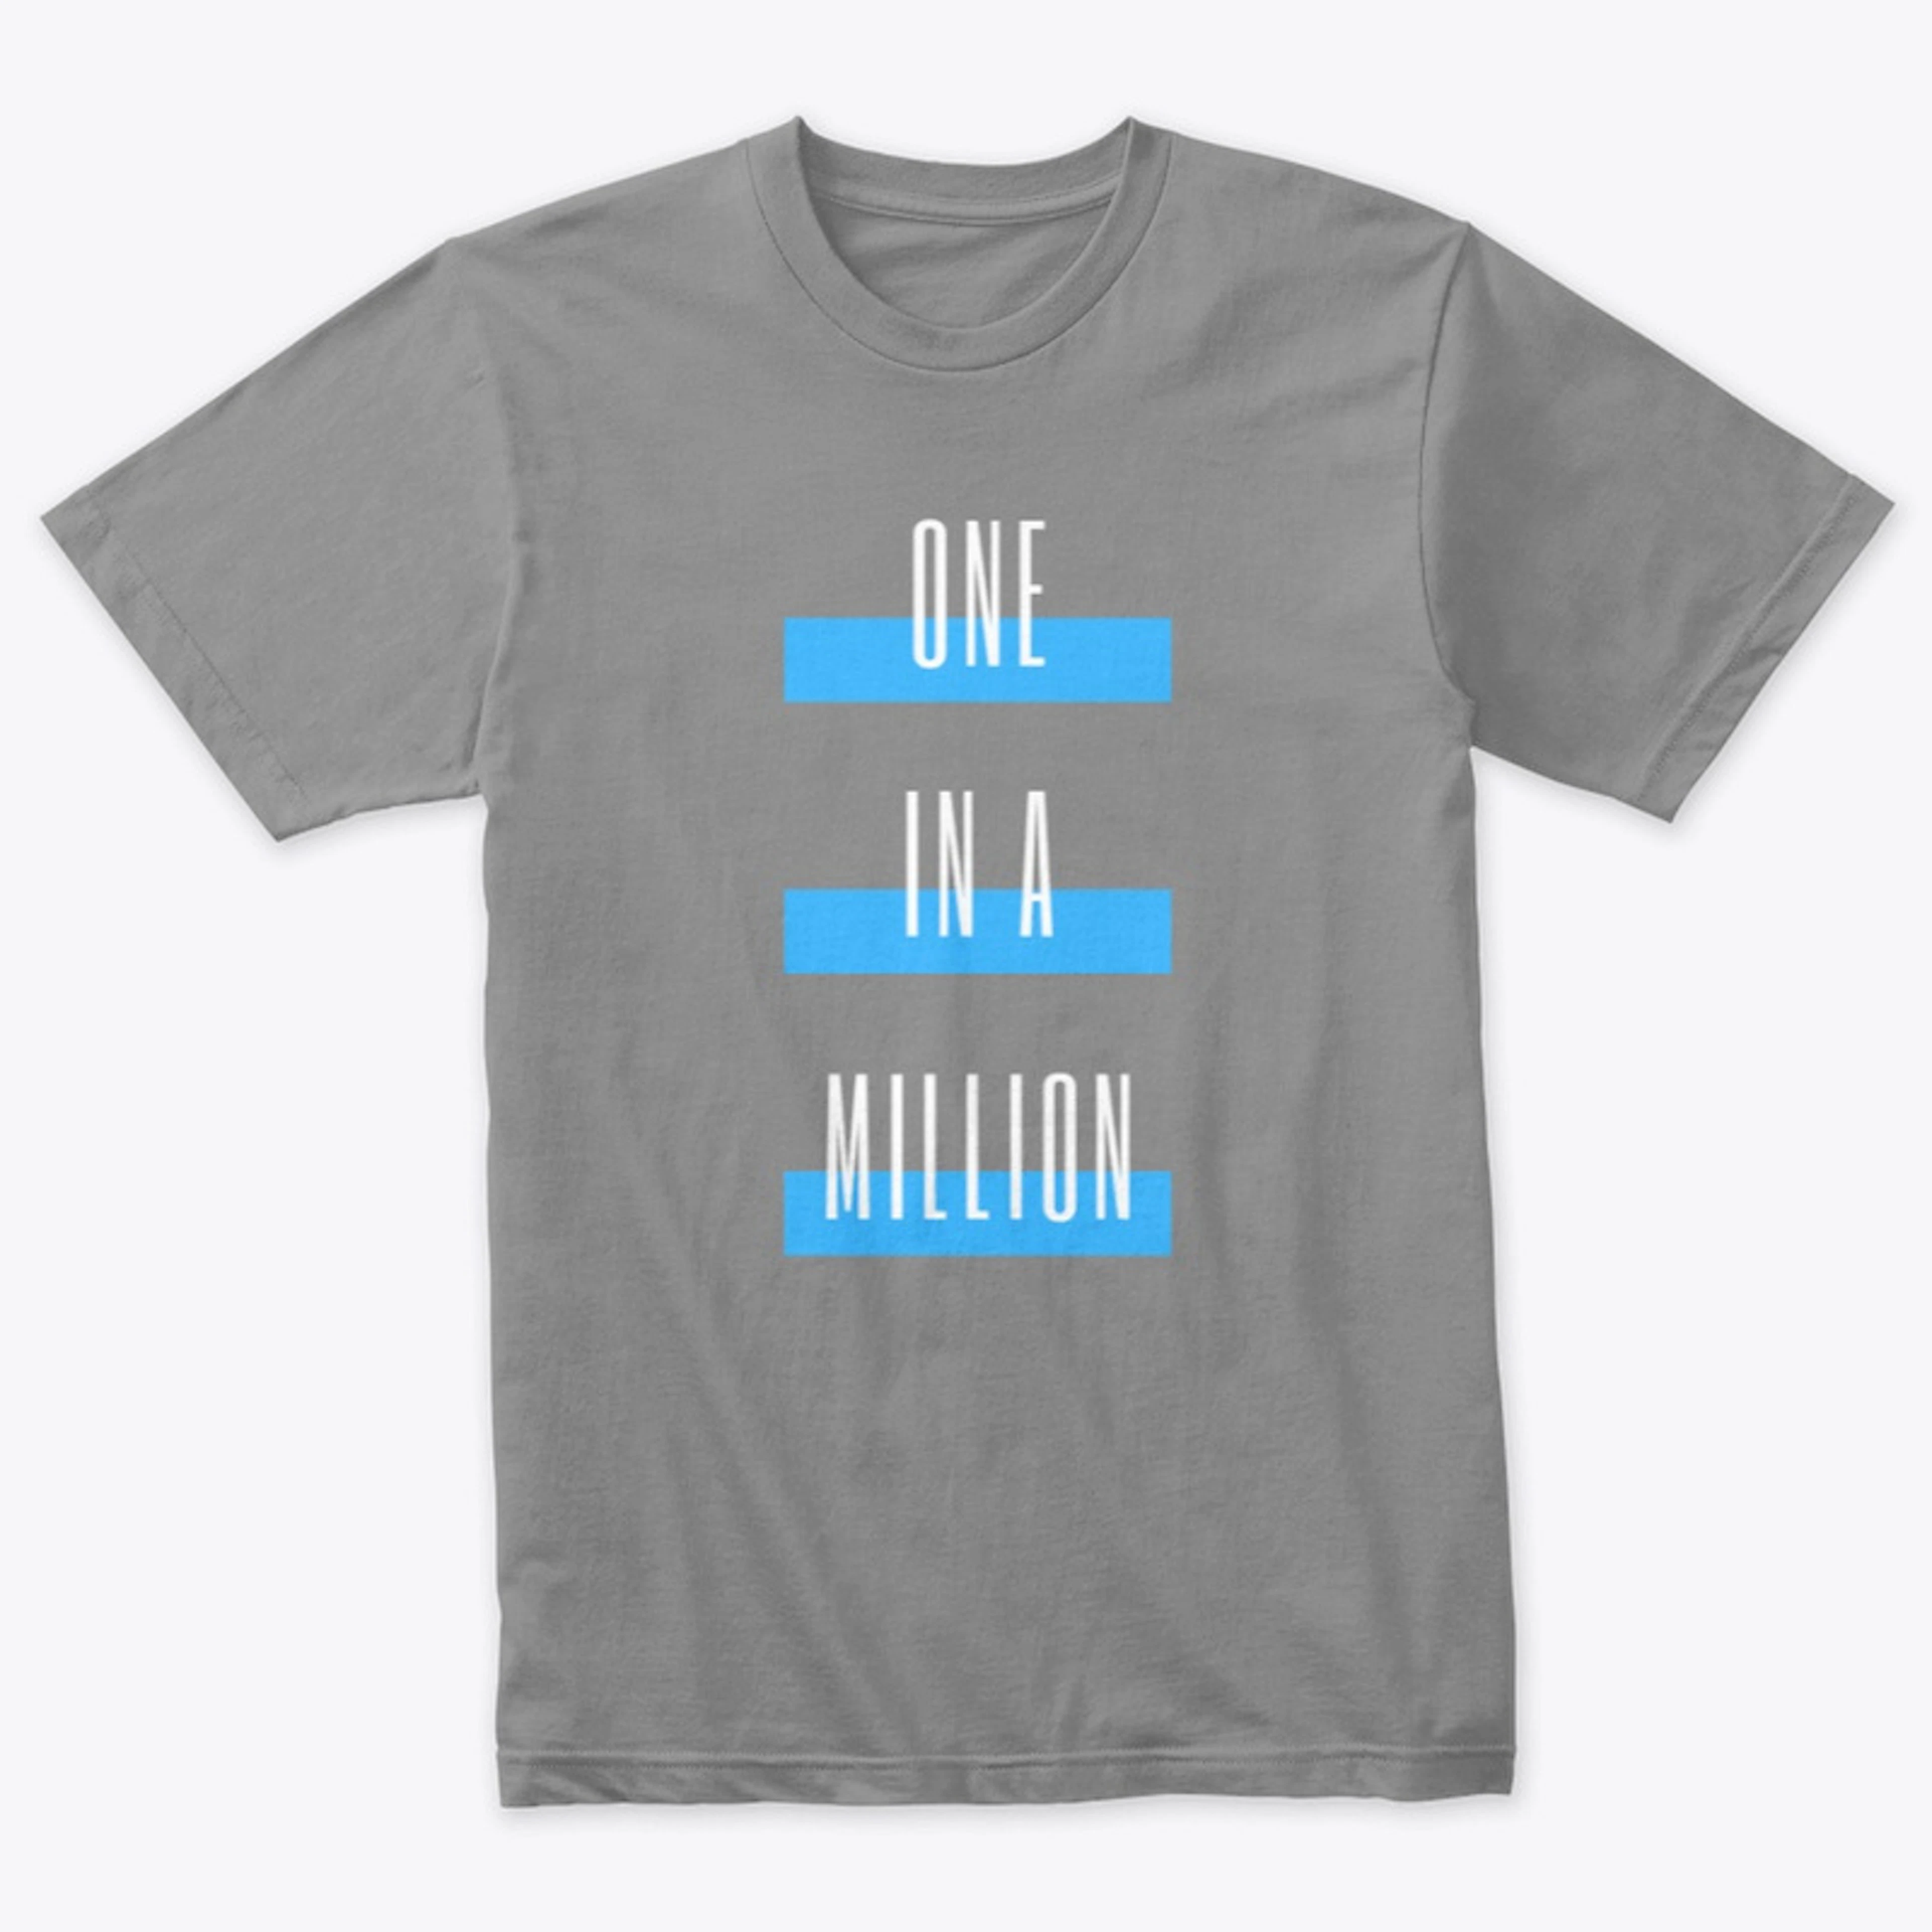 One in a Million Design